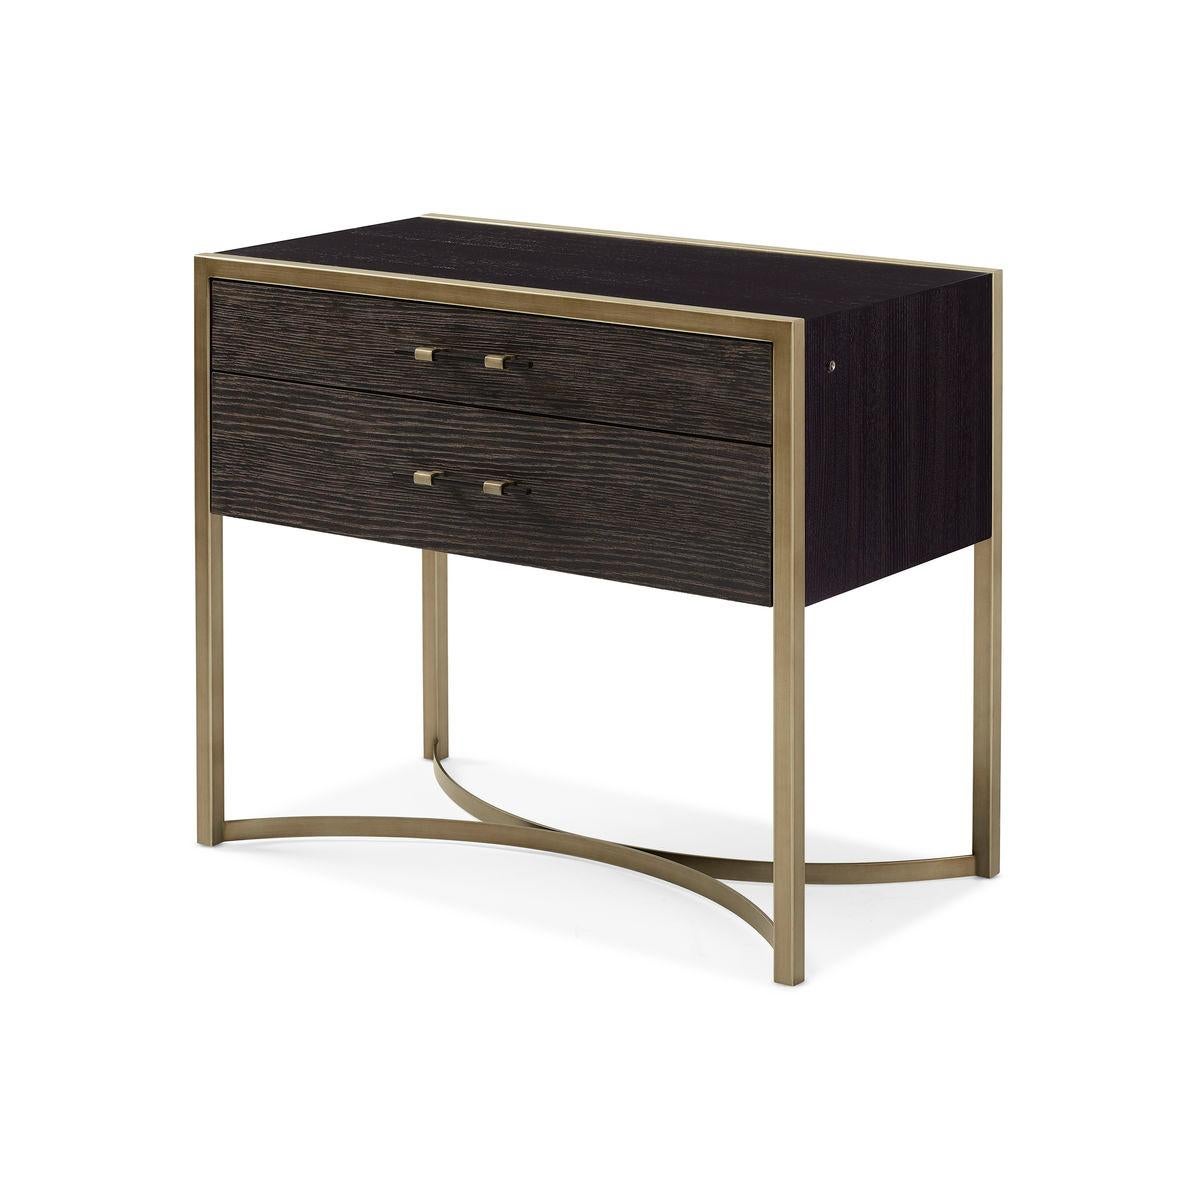 The clean-lined profile is paired with a shapely metal base created by two half circles. With its medley of cerused oak, black stained Ash and bronze metallic finishes, this bedside essential feels both classic and style-forward. Two drawers